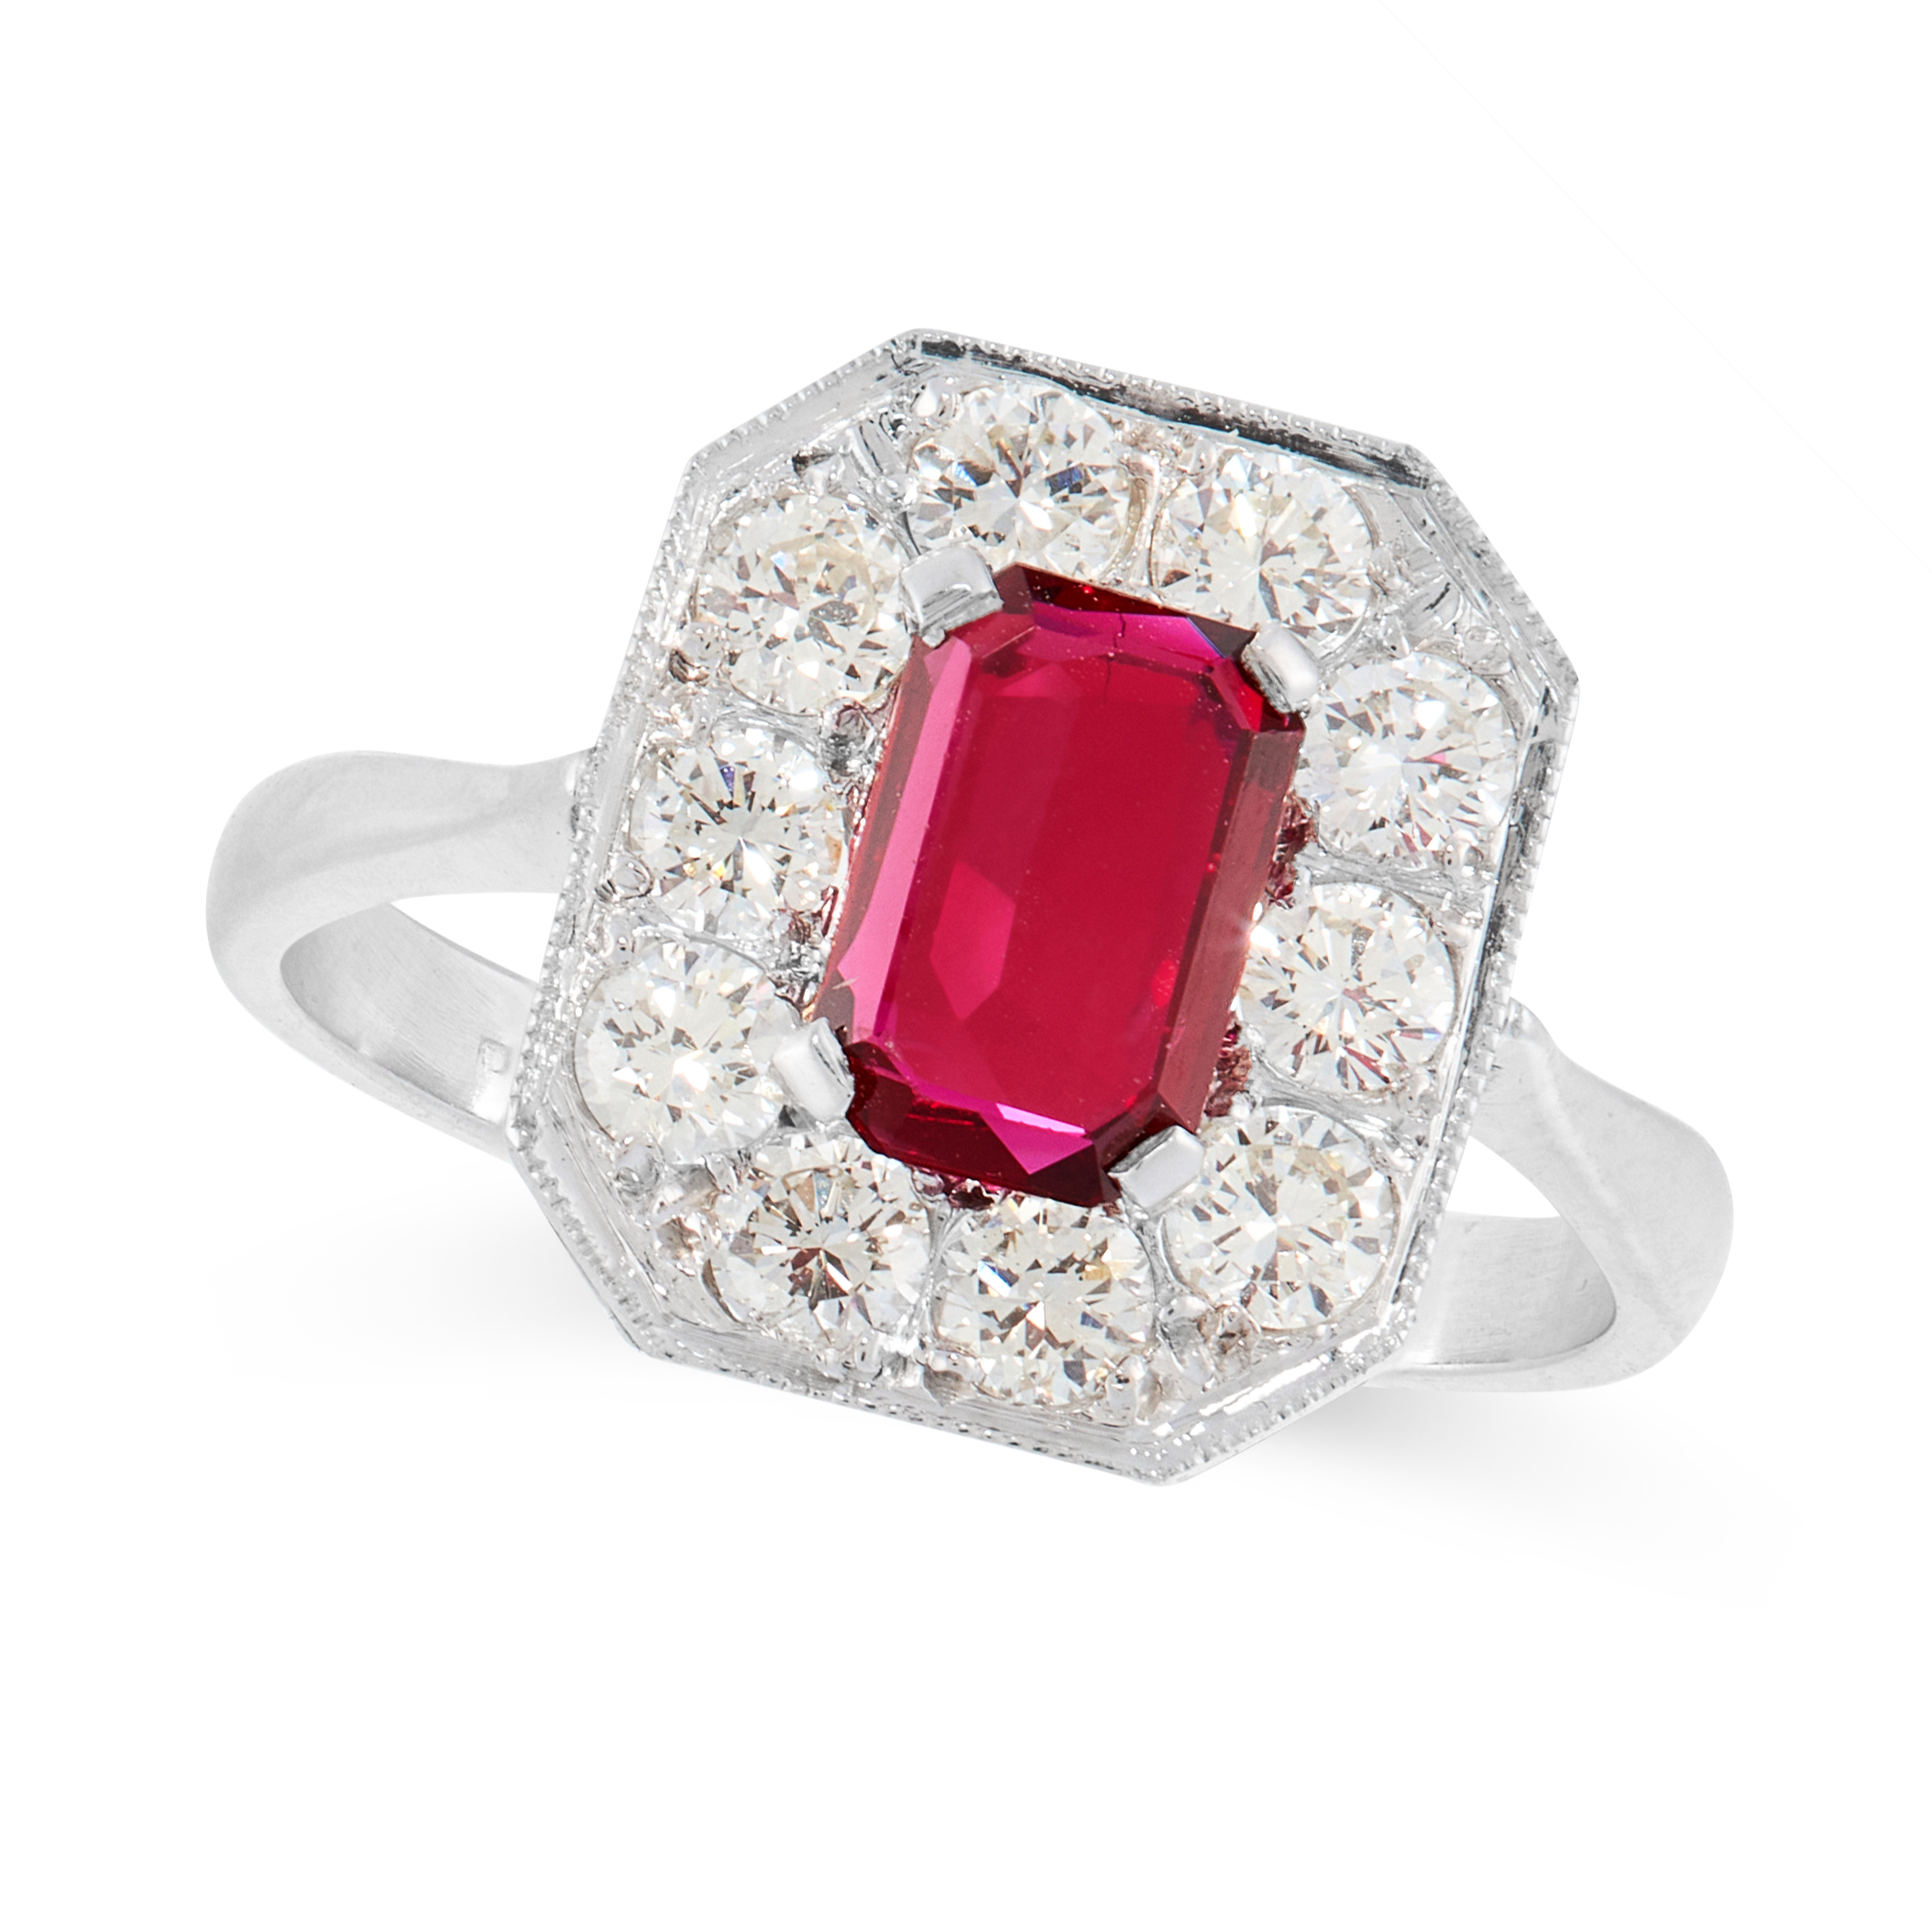 A RUBY AND DIAMOND DRESS RING in platinum, set with an emerald cut ruby of 0.85 carats, within a